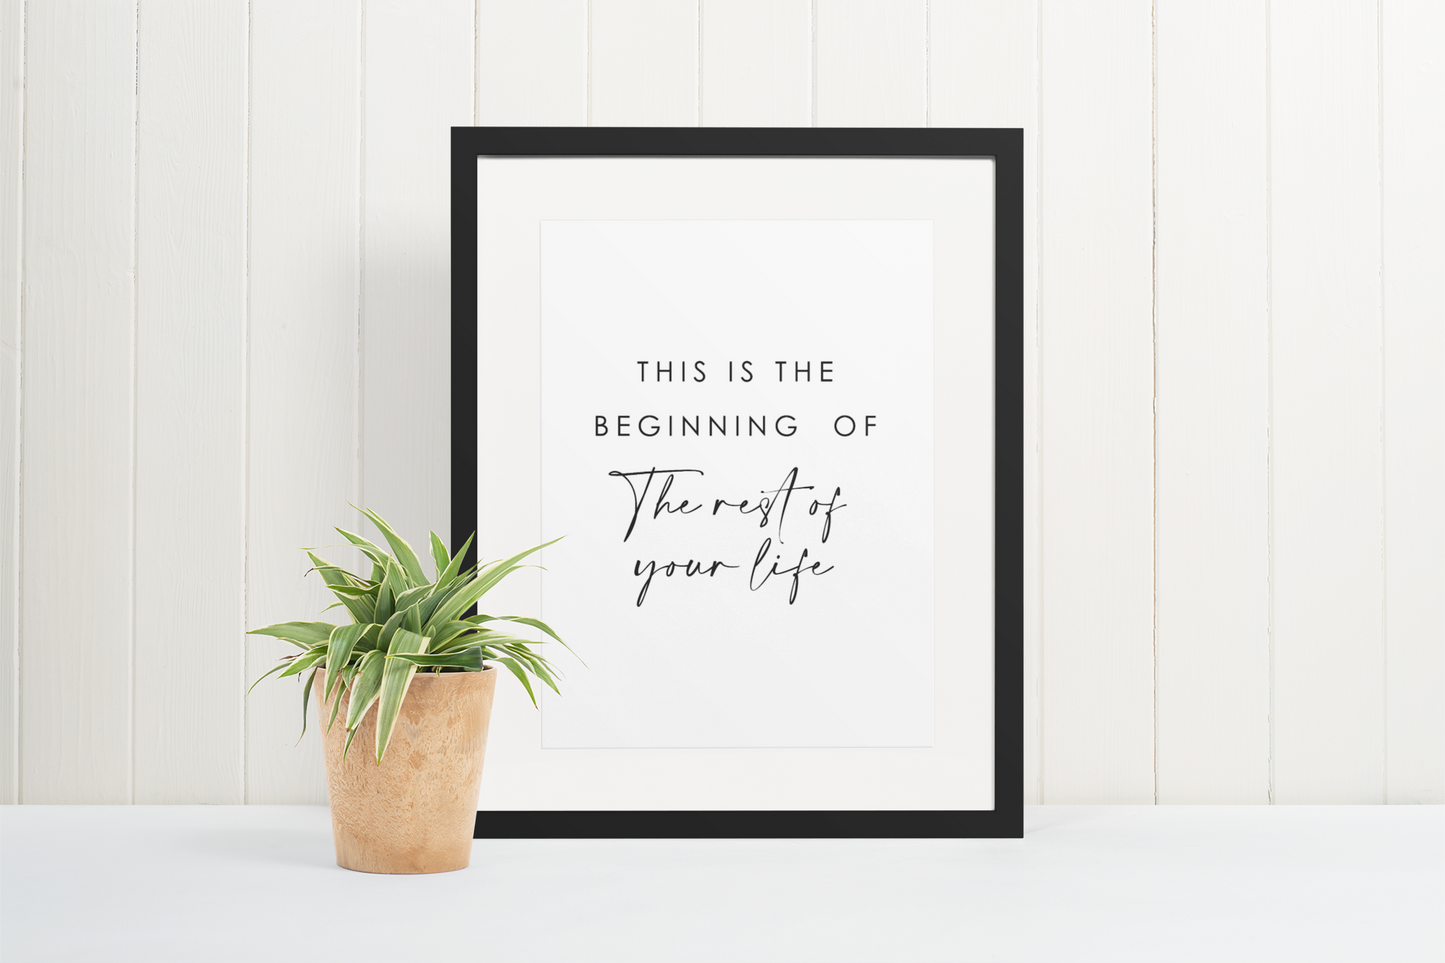 "This is the beginning of the rest of your life" (White background)